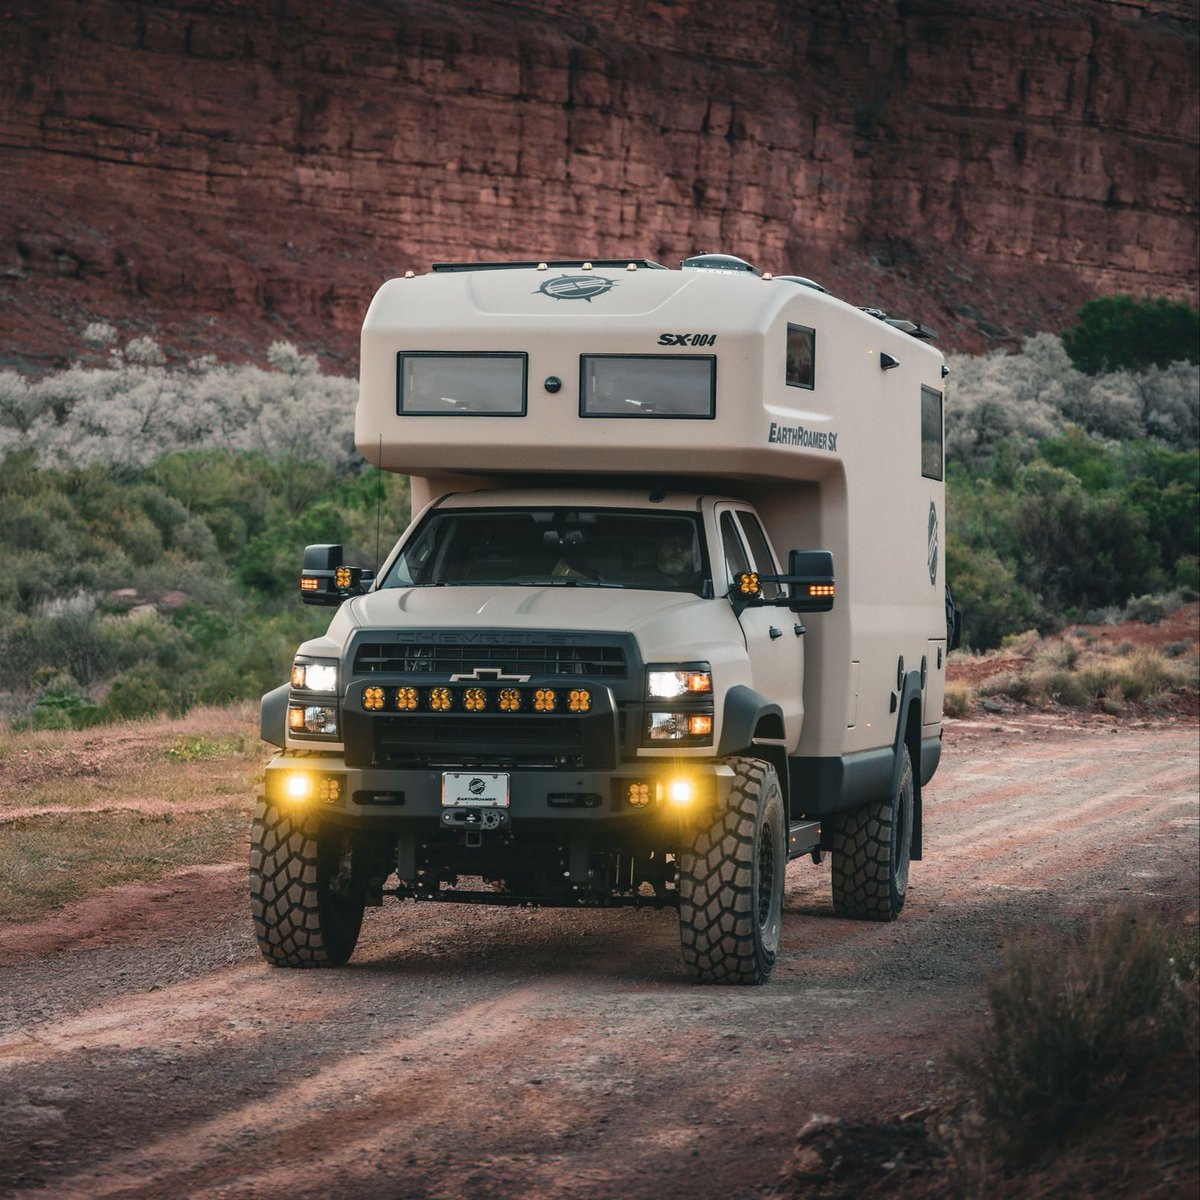 Cruisin' through the wilderness with all the comforts of home 🏠🏜️ · · · #earthroamer #offroad4x4 #expeditionvehicle #campinglife #overlanding #4x4life #4x4trucks #vanlife #vanlifeadventures